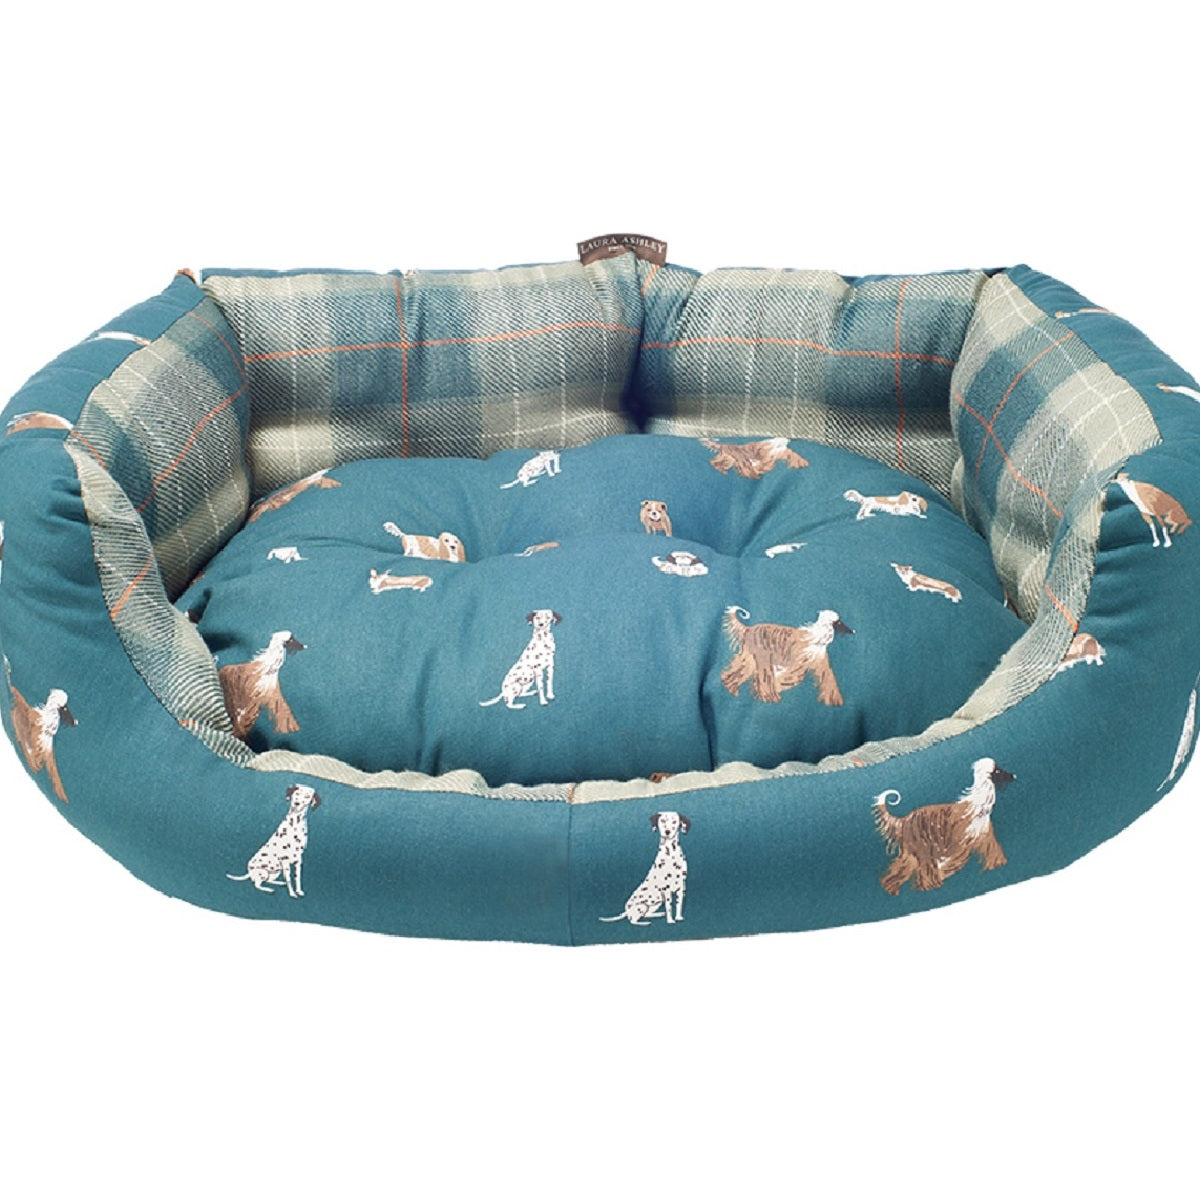 Laura Ashley - Park Dogs Deluxe Slumber Bed